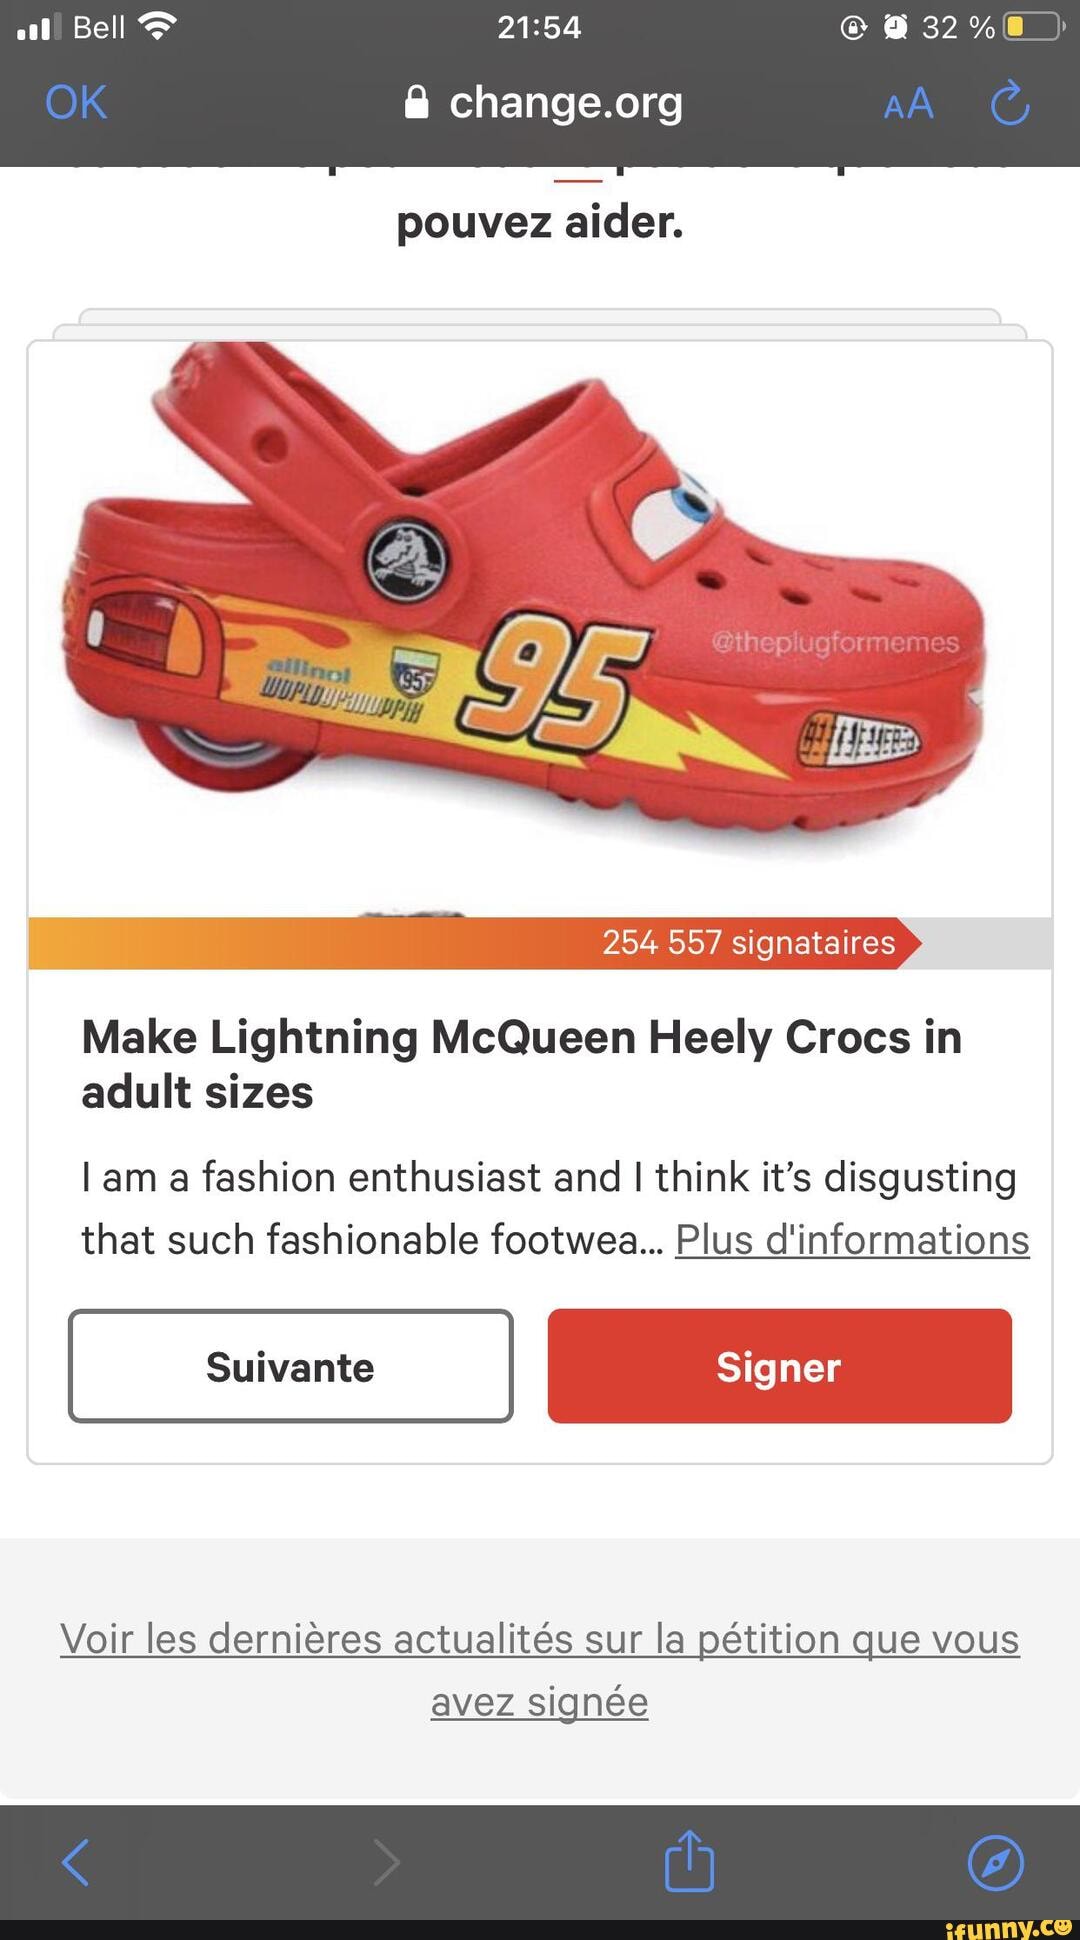 All Bell & OK pouvez aider. 254 557 signataires Make Lightning McQueen  Heely Crocs in adult